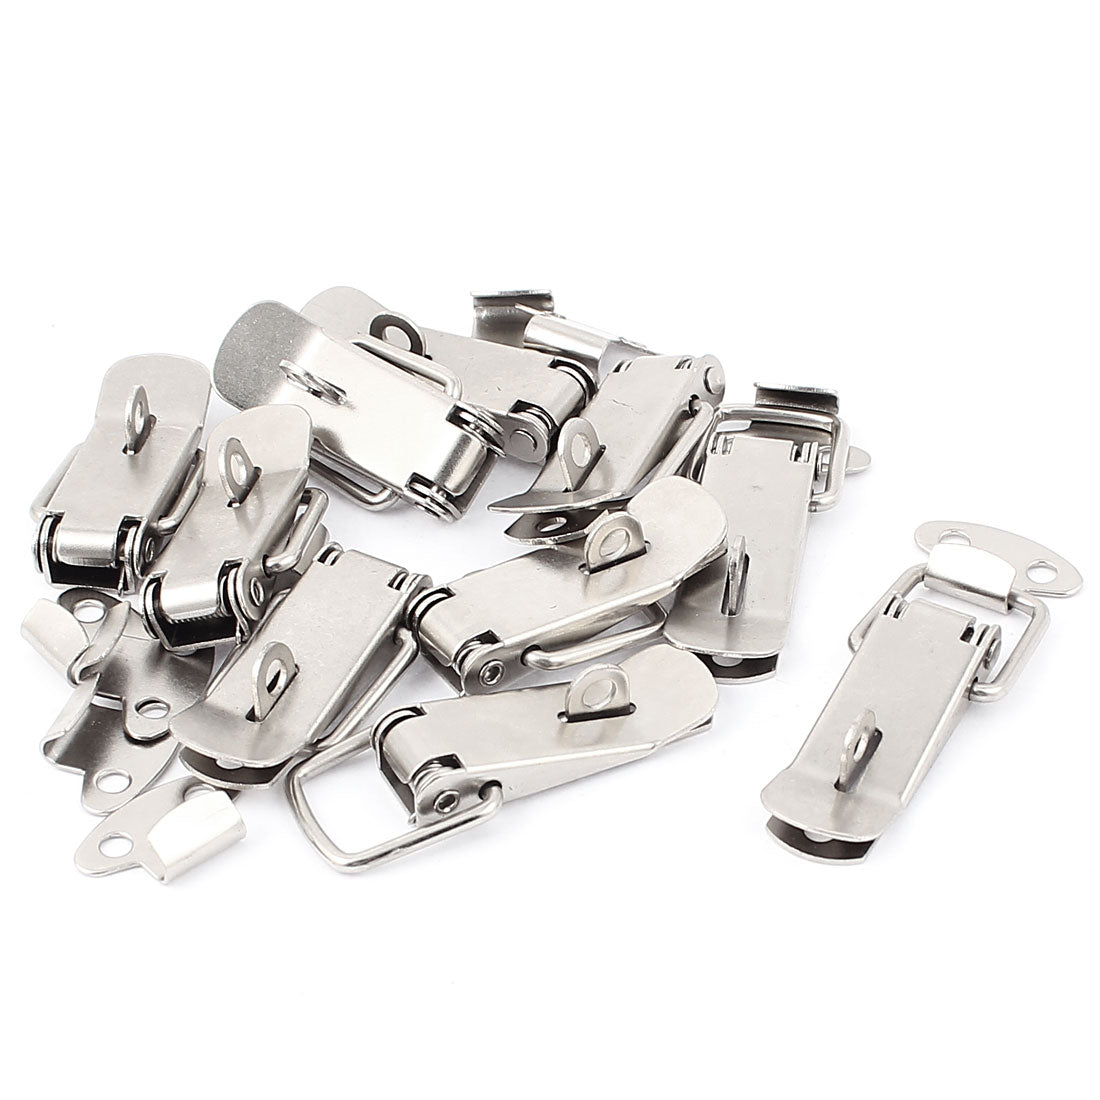 uxcell Uxcell Case Box Metal Spring Loaded Toggle Latch Catch Clamp Clip 10pcs